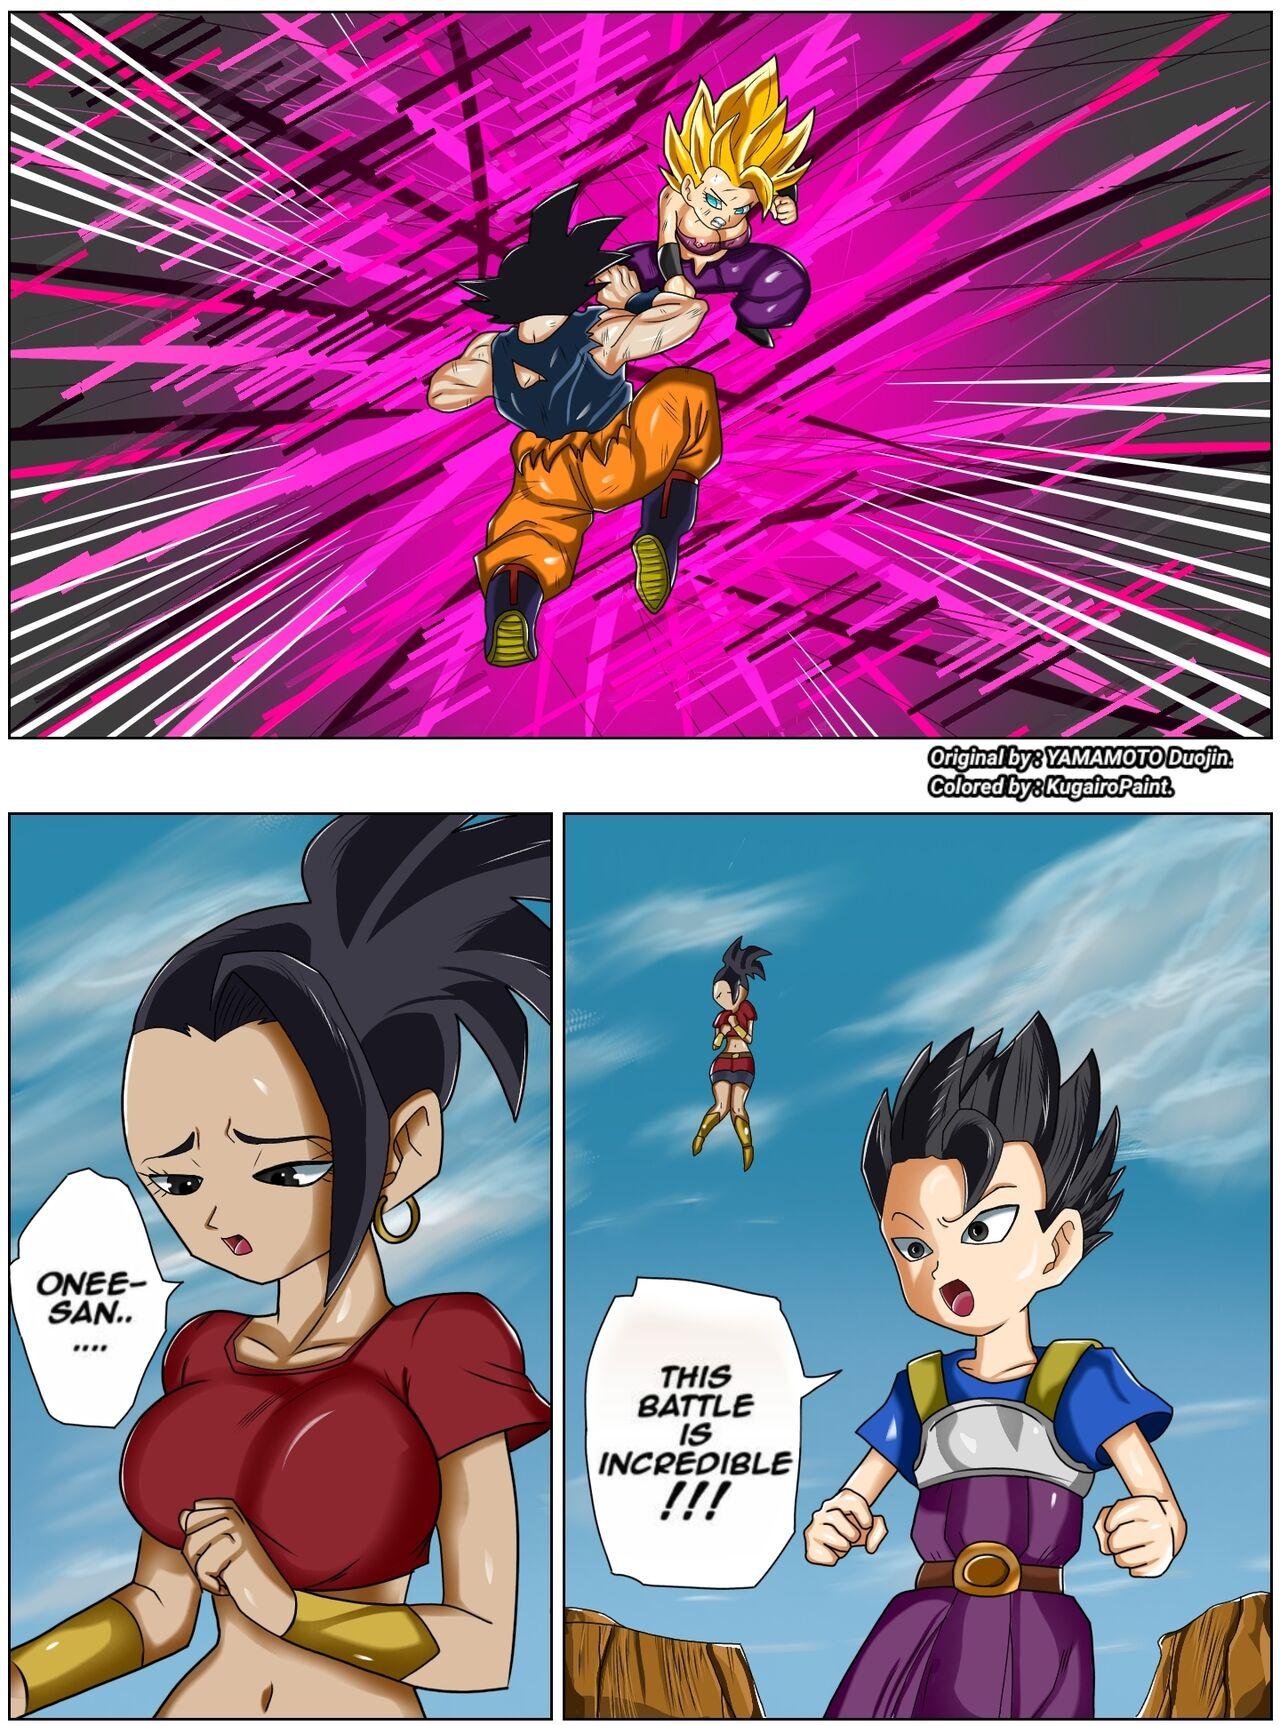 Tiny Fight in the 6th Universe!! - Dragon ball super Taiwan - Page 4